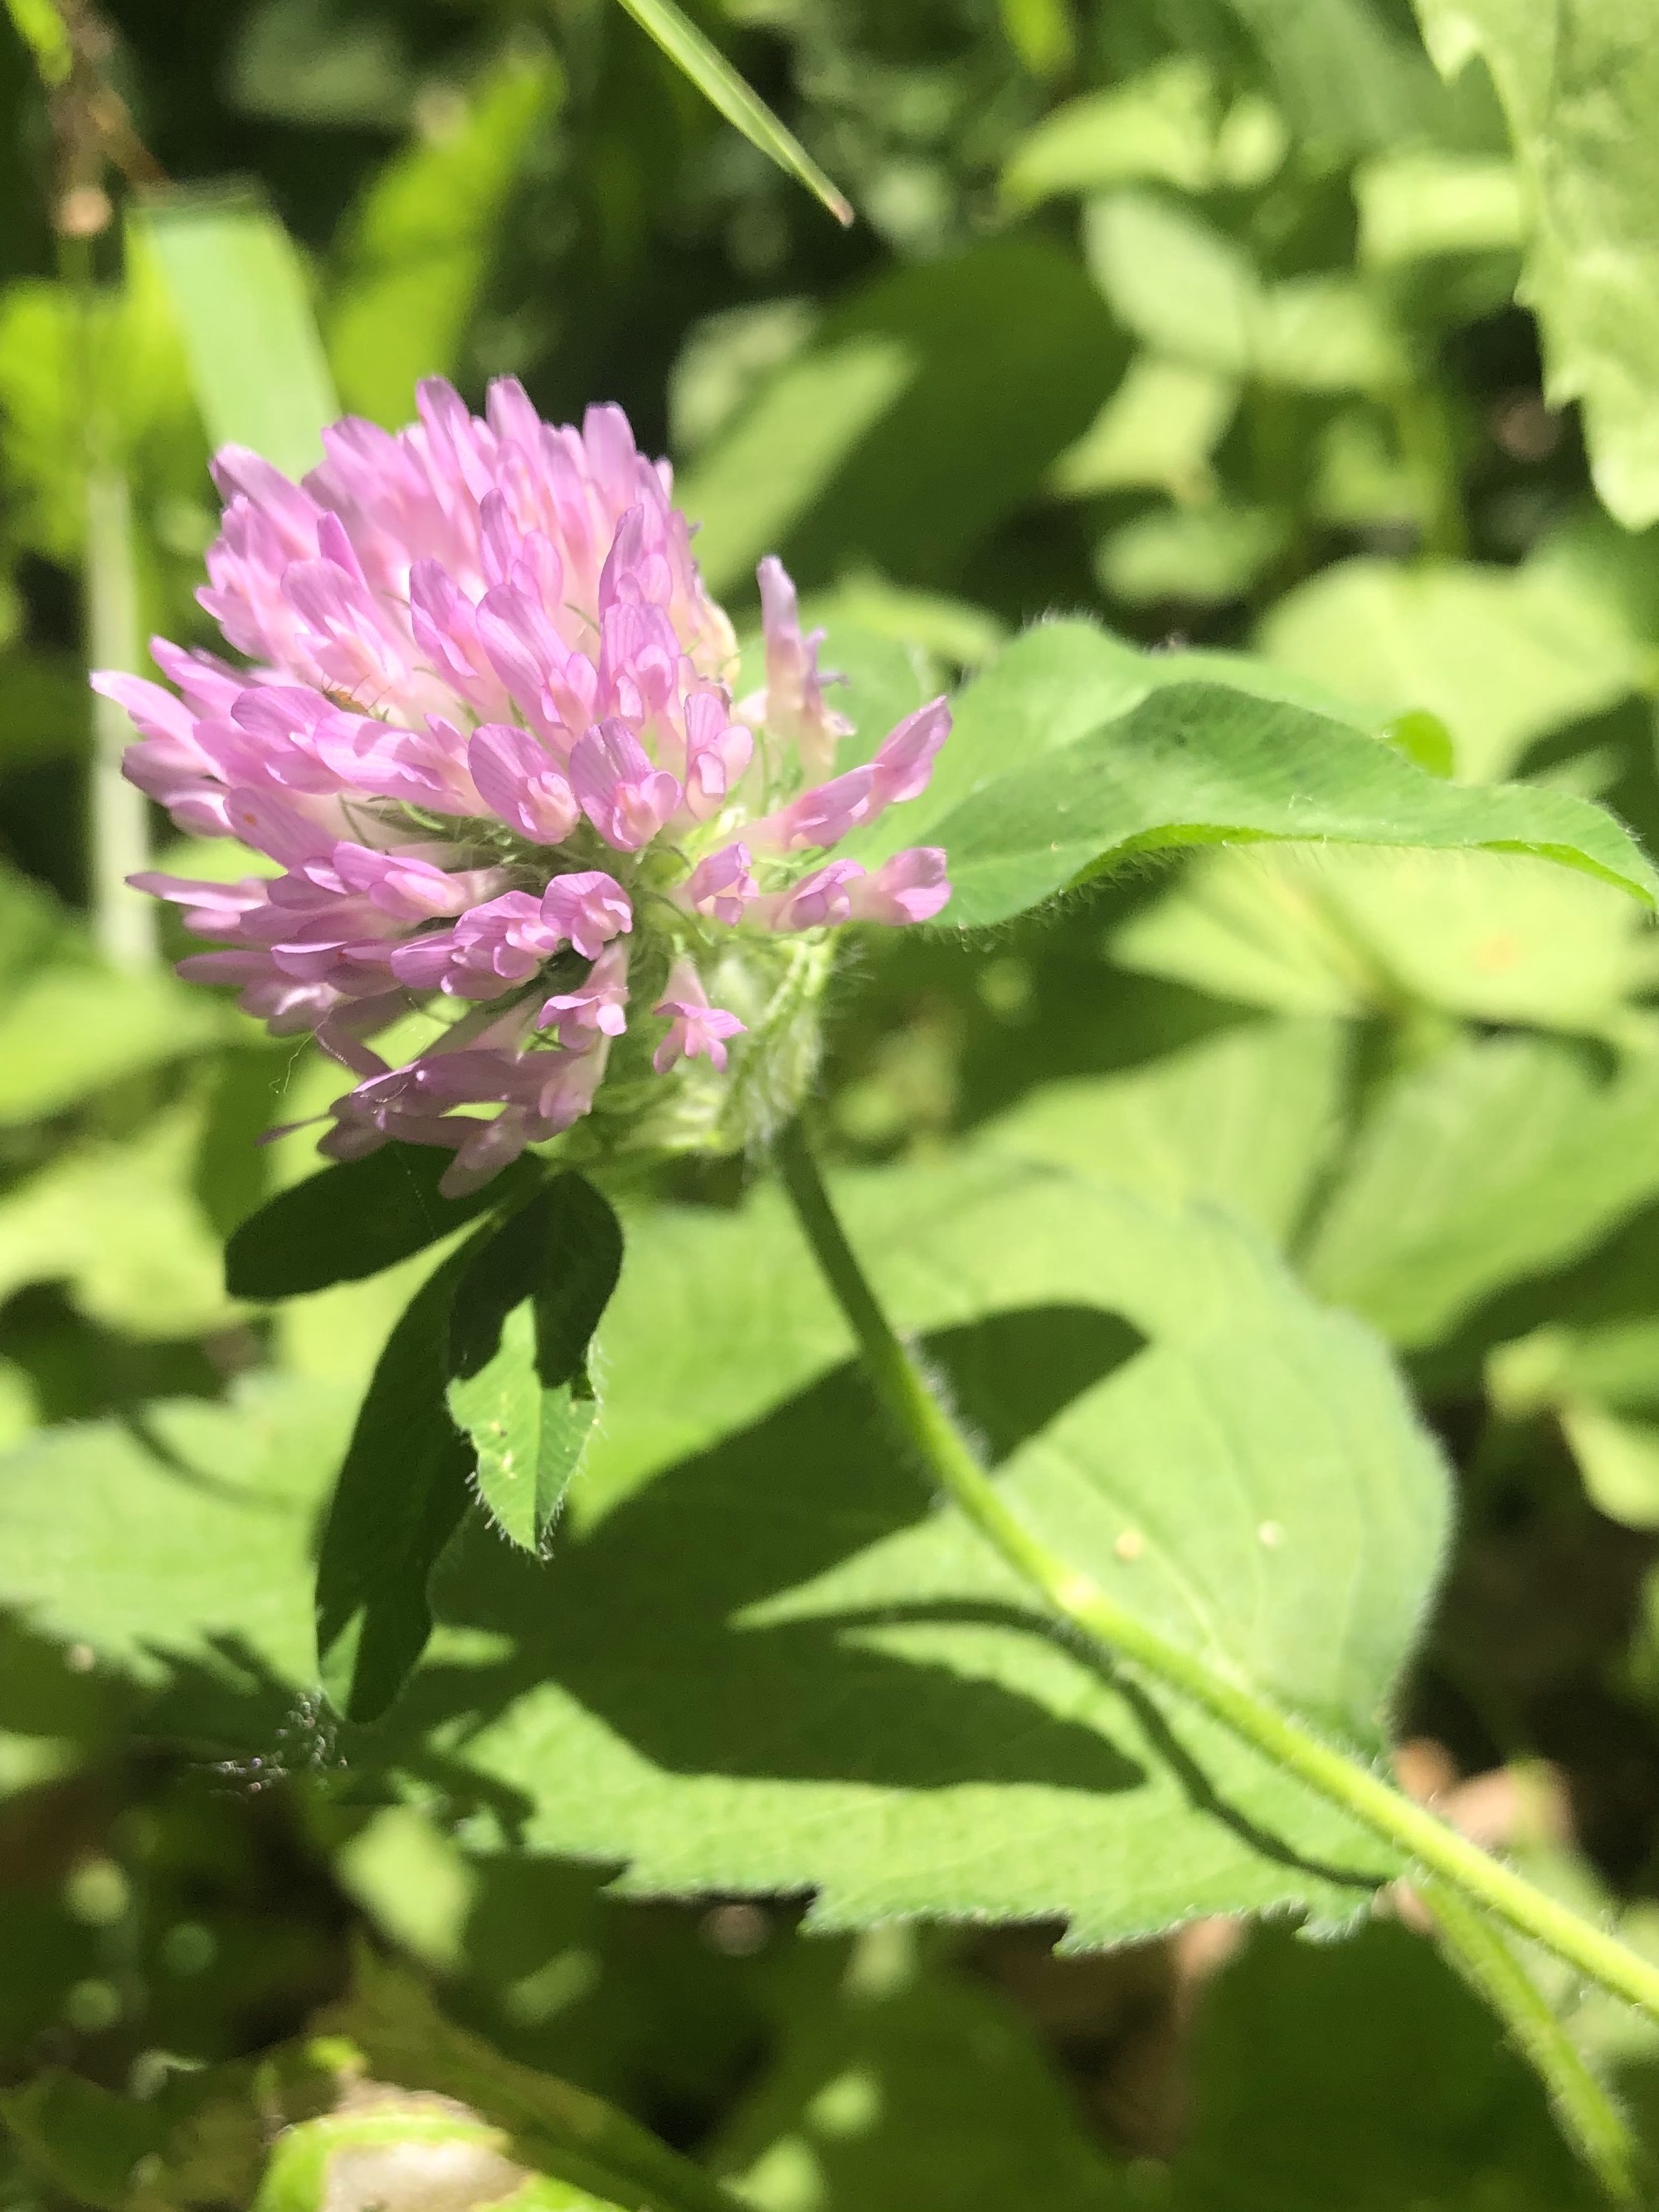 Red Clover in Nakoma Park in Madison, Wisconsin on June 17, 2021.